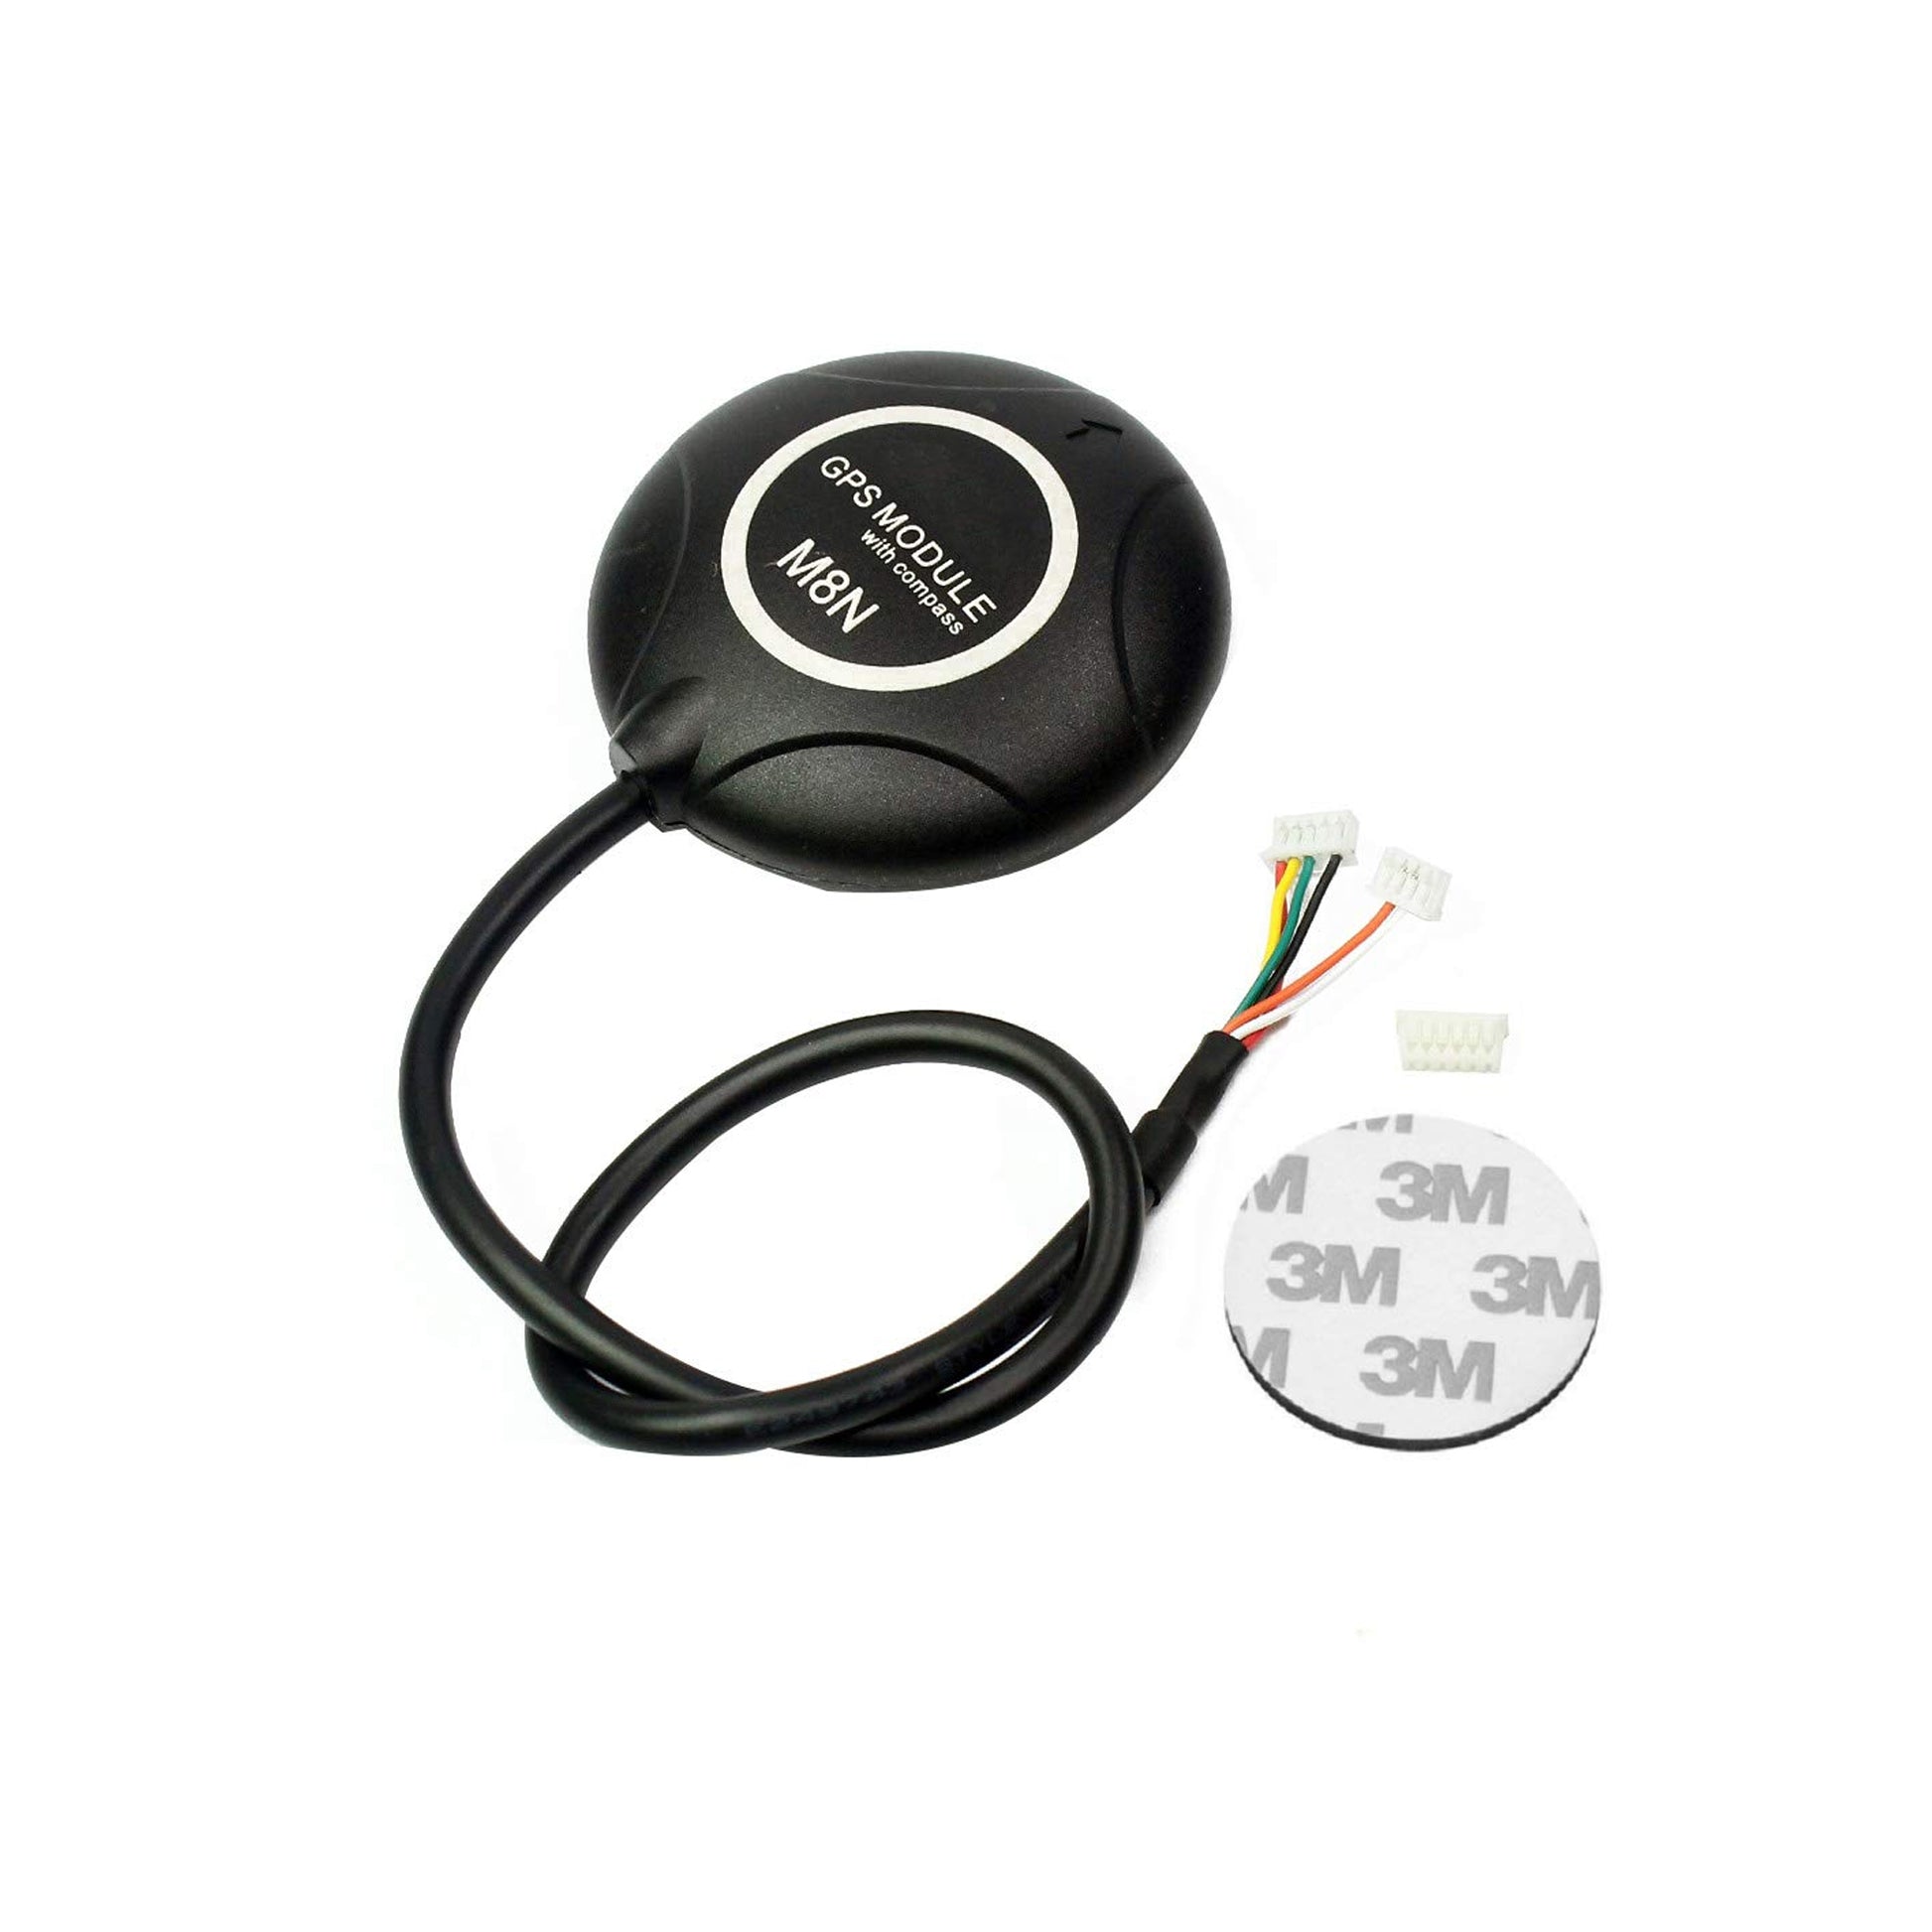 Neo M8N GPS Module Compass with Holder for APM 2.5 2.6 2.8 Pixhawk CC3D Naze32 F3 Flight Controller - ML022 - REES52